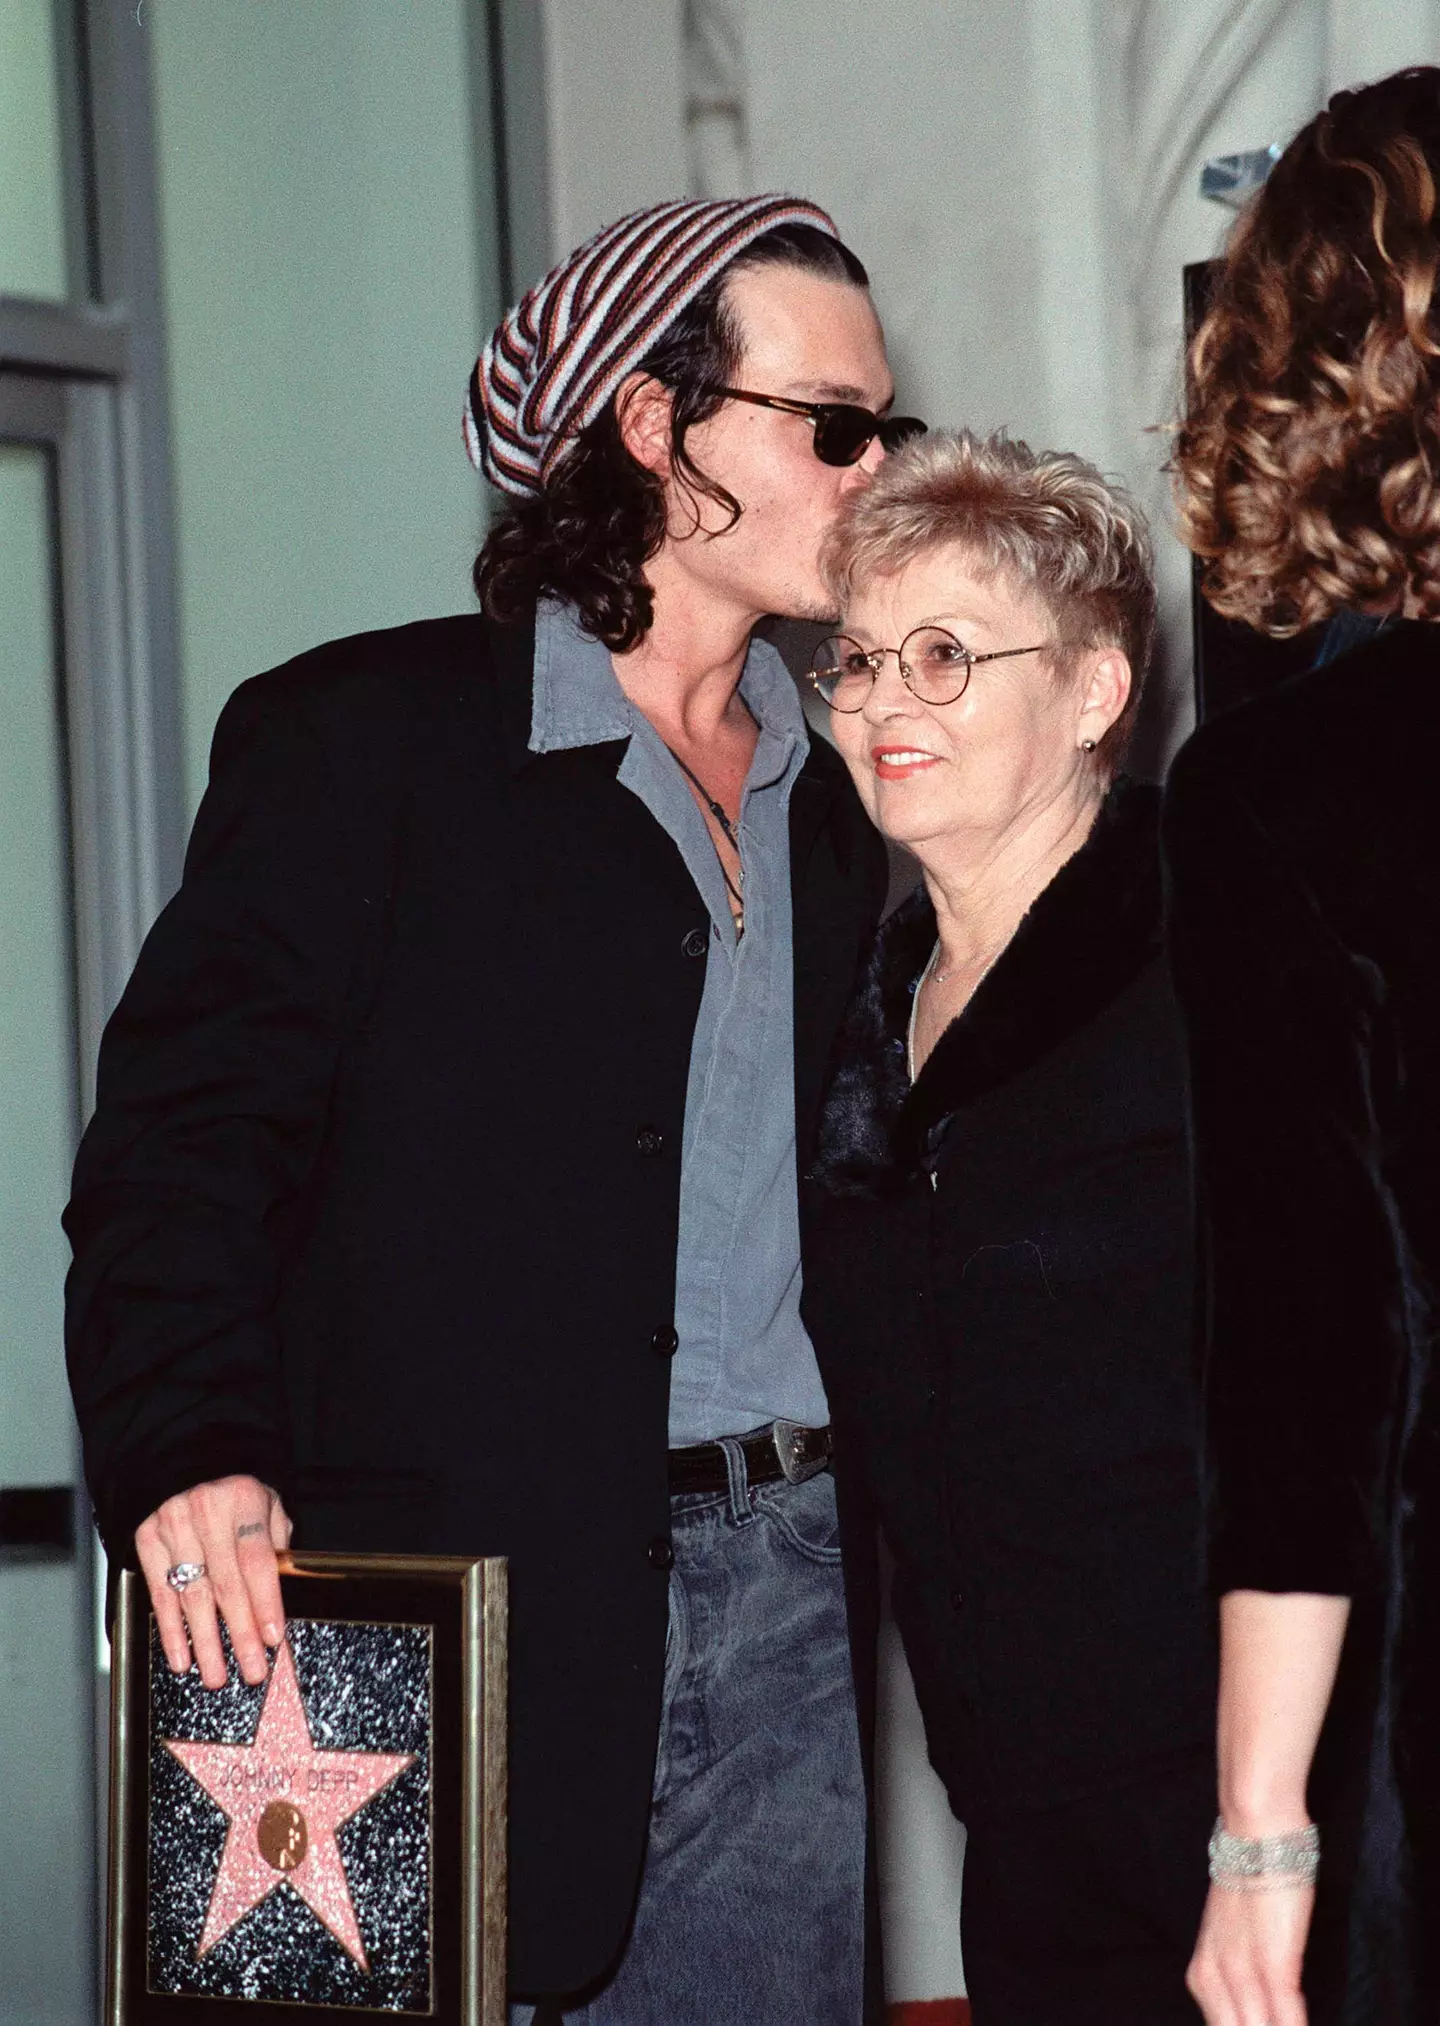 Depp told the court he is ‘legally blind’ and detailed his mother Betty Sue Palmer’s abuse.